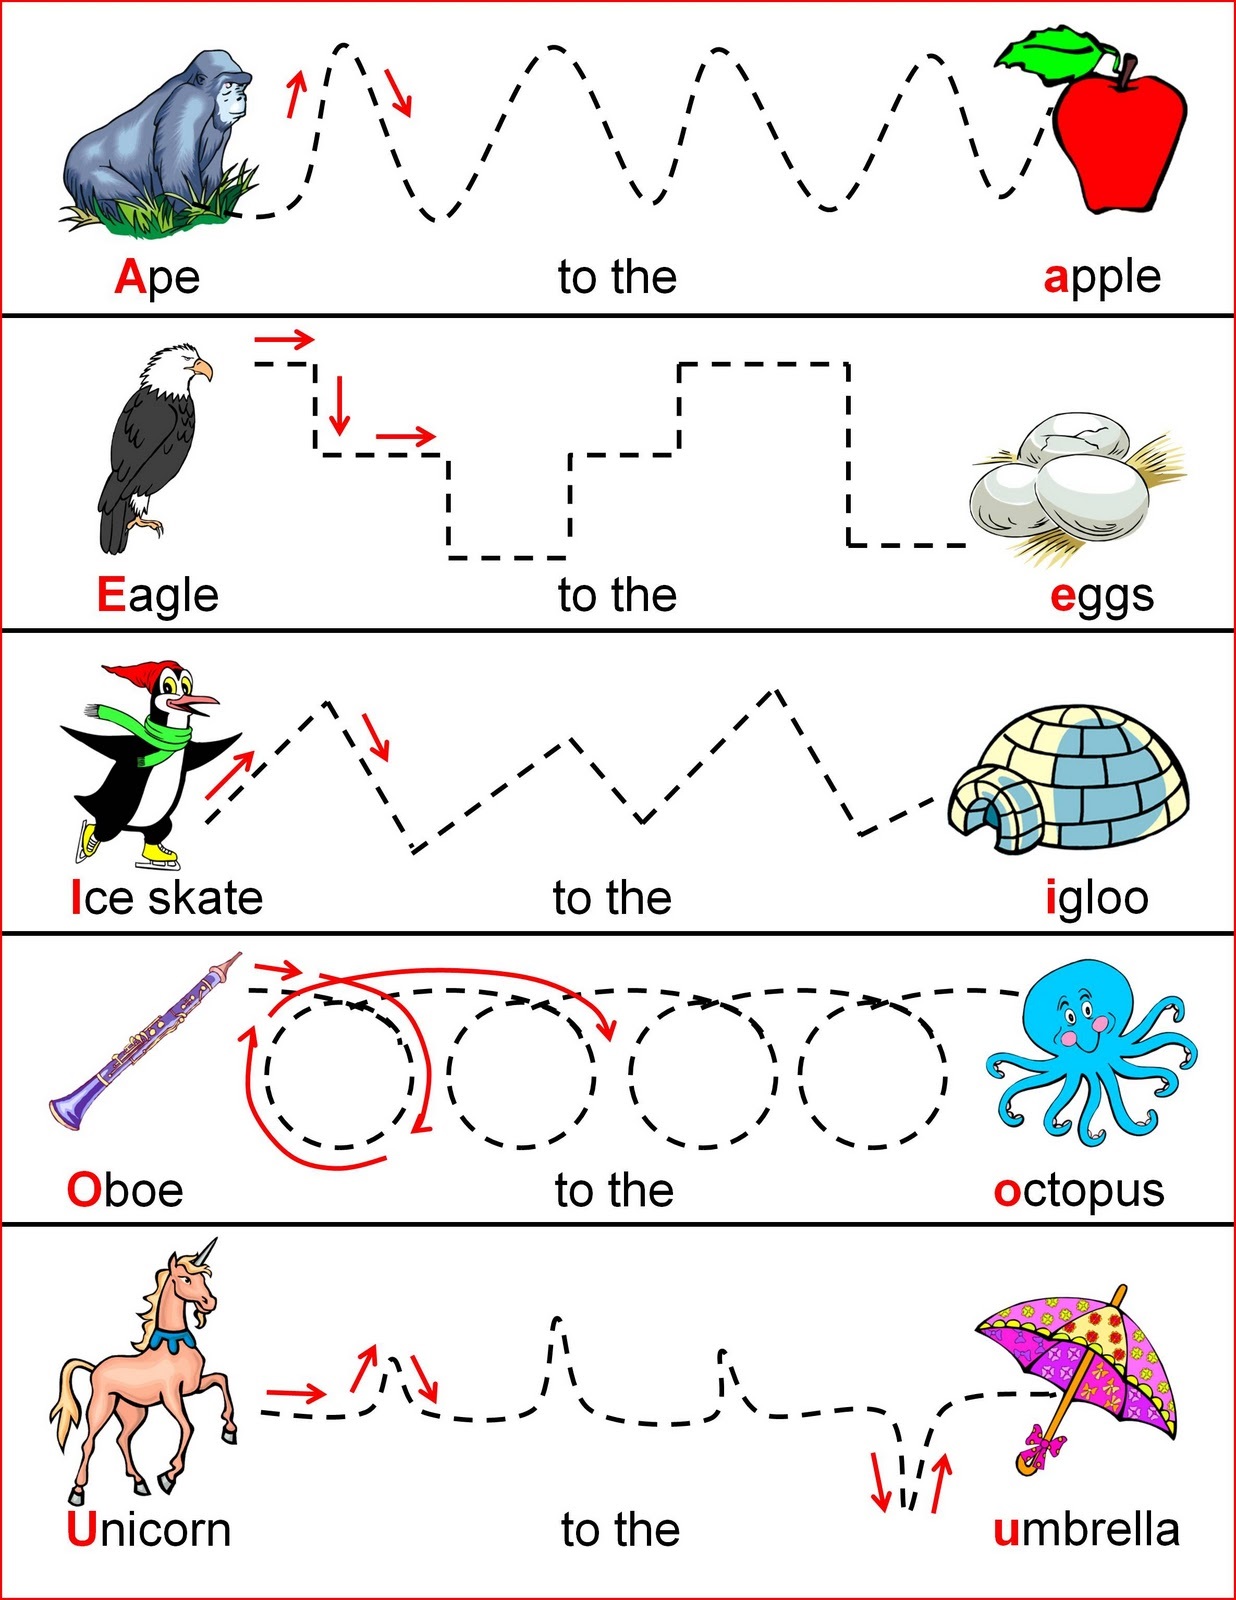 printable activity sheets for 2 year olds